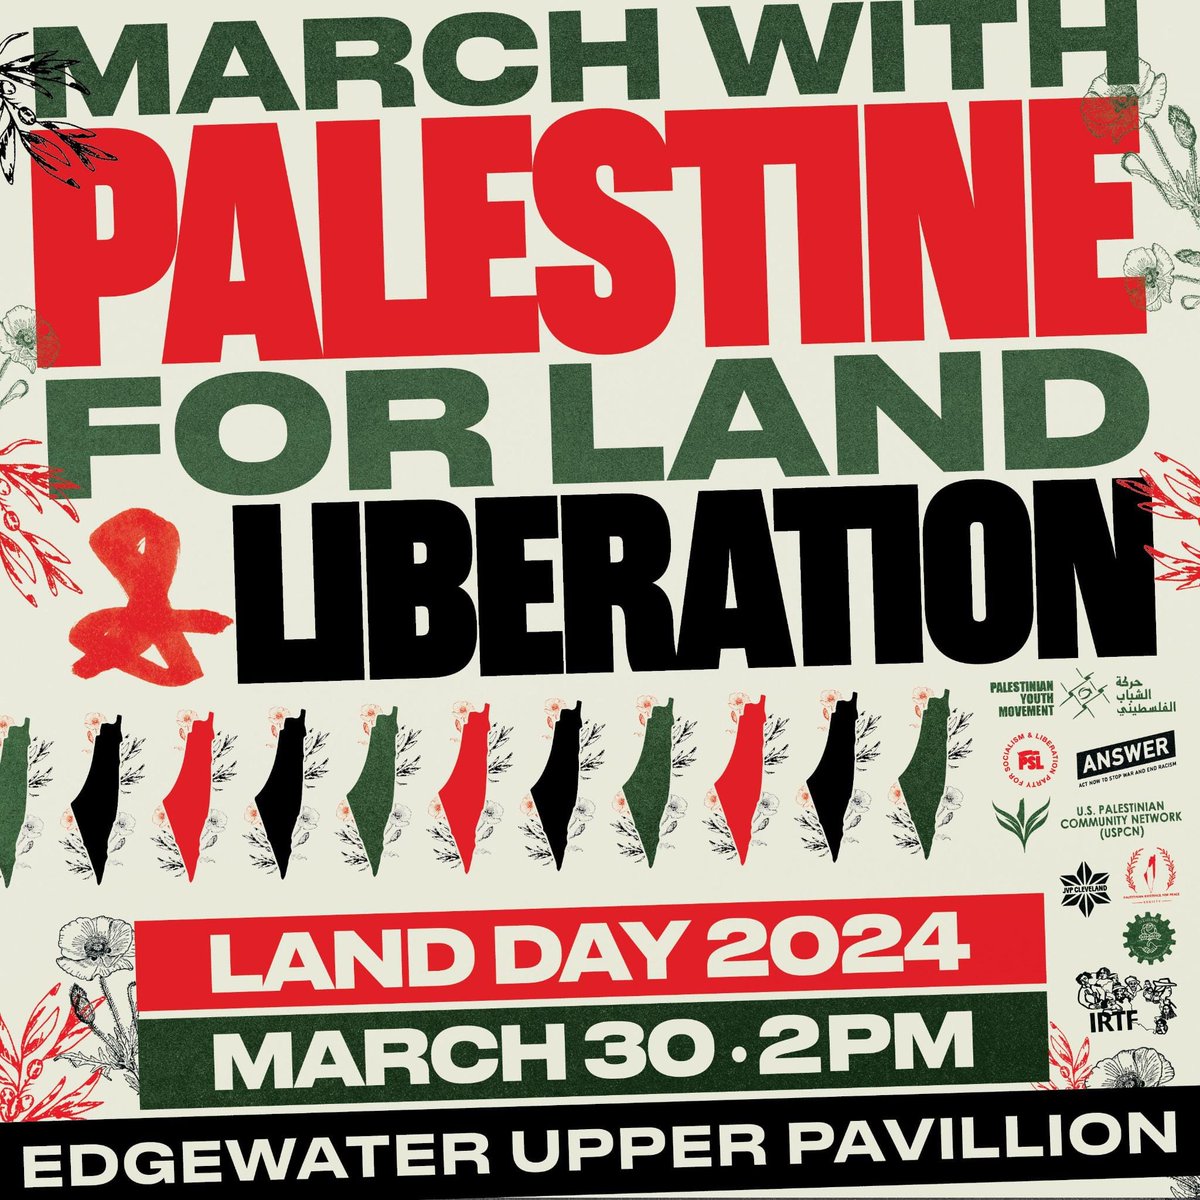 Cleveland! Join us on March 30th at 2 pm at Edgewater Upper Pavilion for a march for Land Day! We'll be gathering together with Palestinians, Jews, allies & all people of conscience to march in solidarity with Palestine. 🇵🇸🇵🇸🇵🇸 @jvplive @palyouthmvmt @pslnational @uspcn